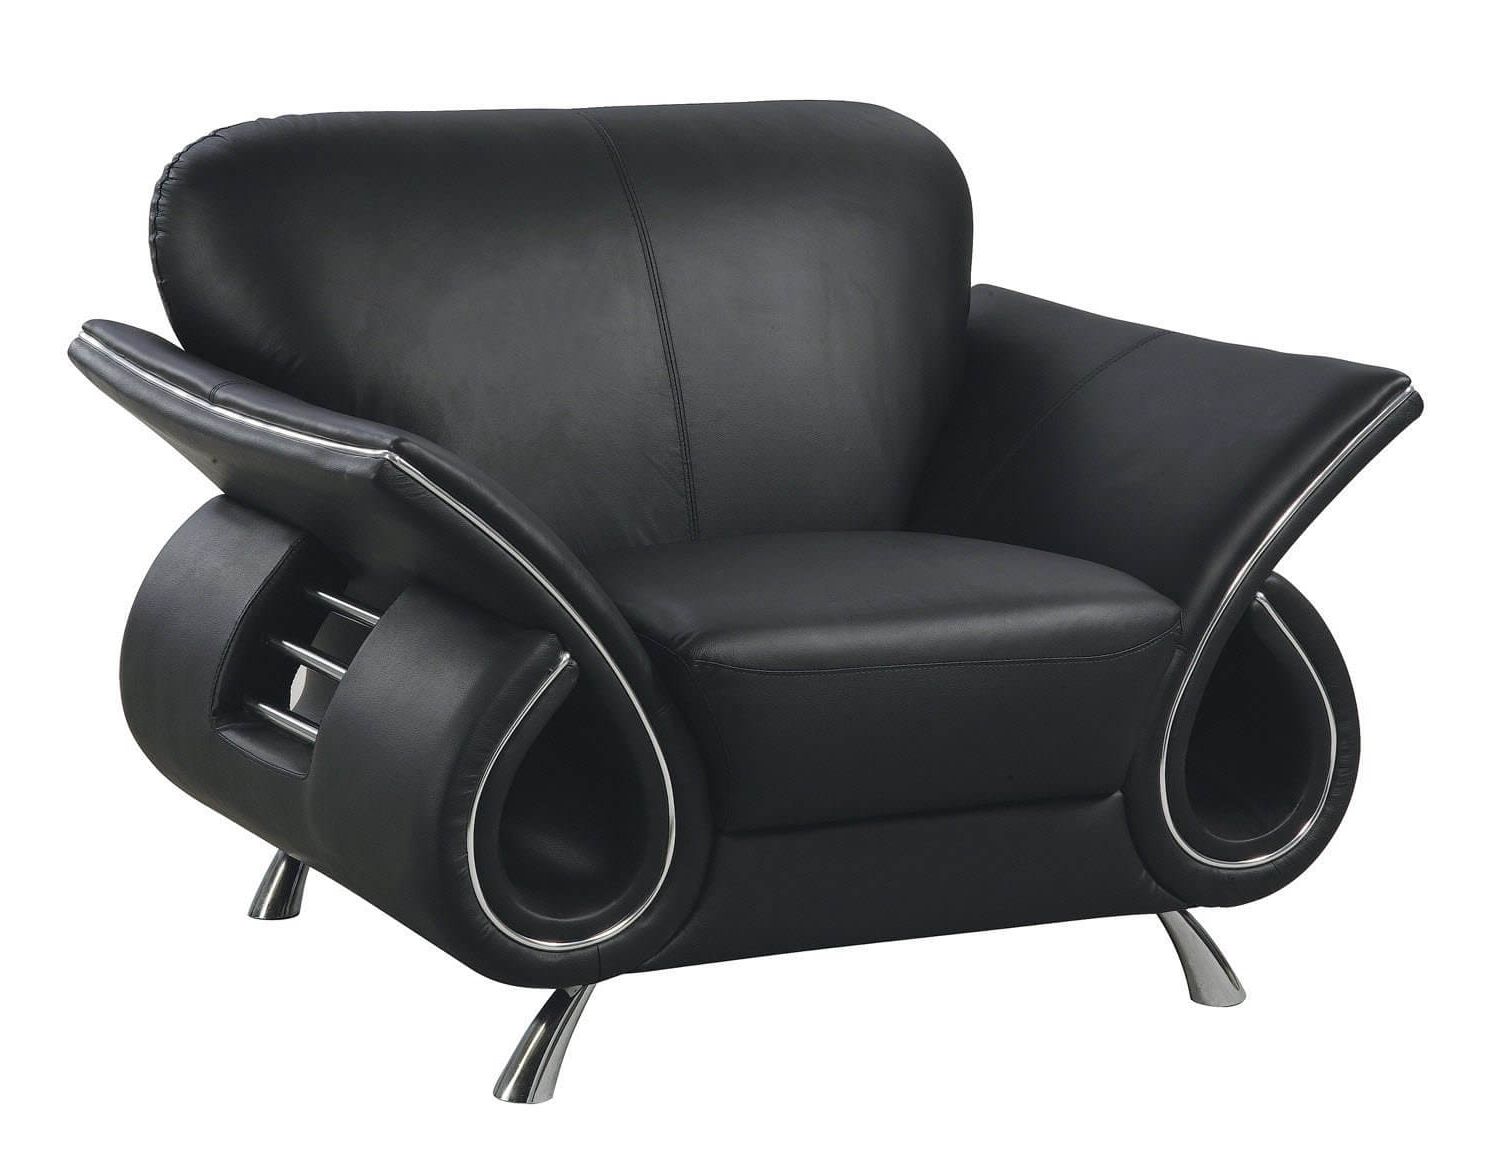 Oversize Wider Armrest Padded Lounge Chairs Inside Well Known 25 Best Man Cave Chairs (View 23 of 25)